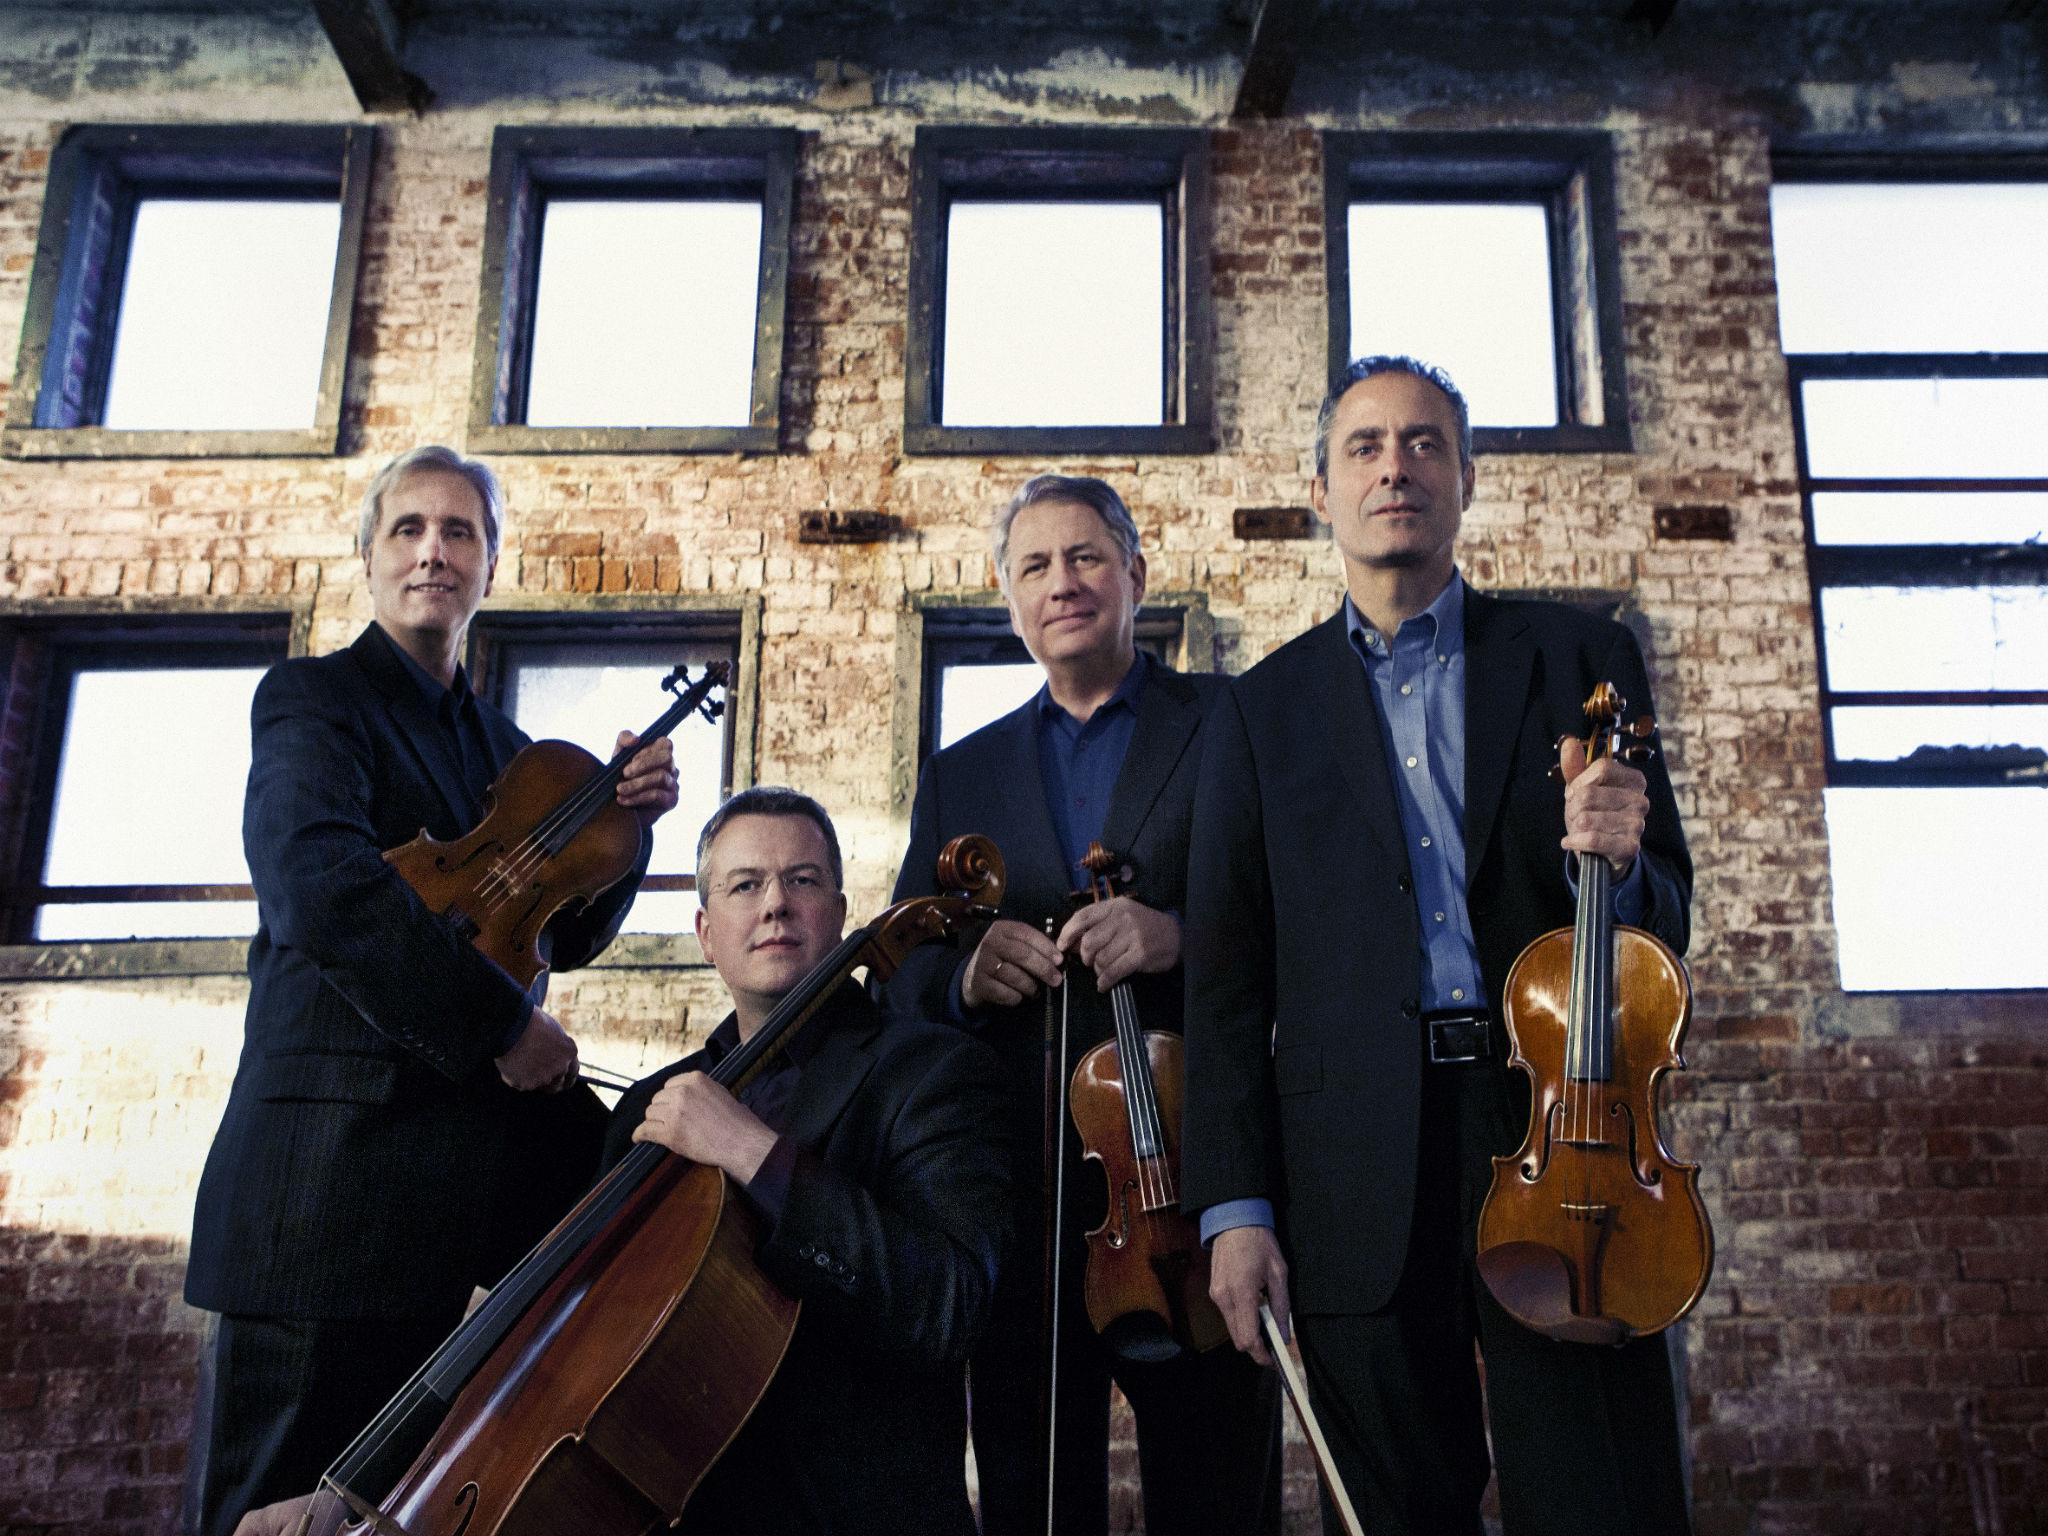 The Emerson Quartet performed Beethoven's 'Grosse Fuge' at London's St John's, Smith Square